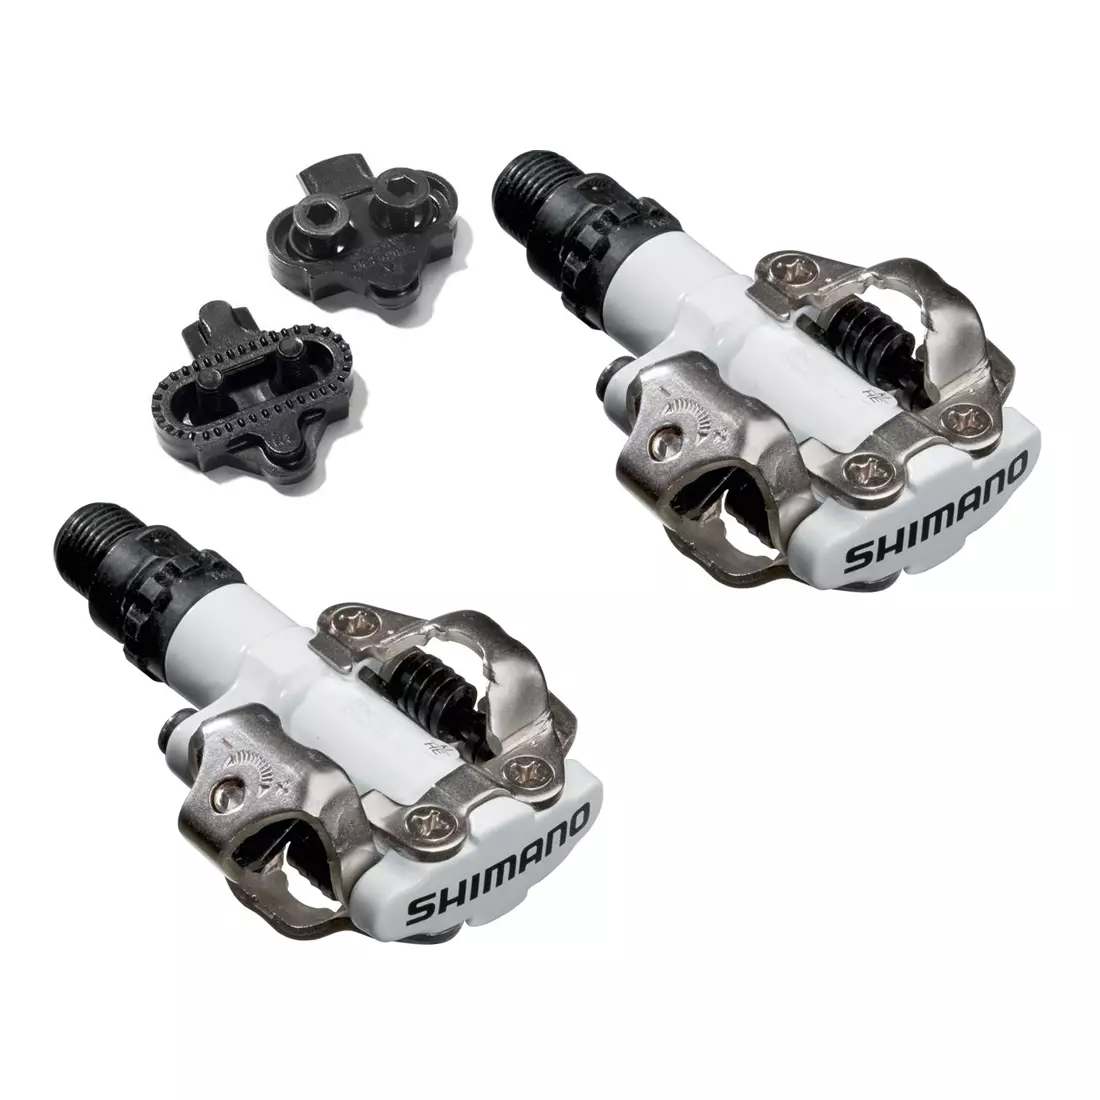 SHIMANO SPD PD-M520 bicycle pedals MTB/ trekking with blocks